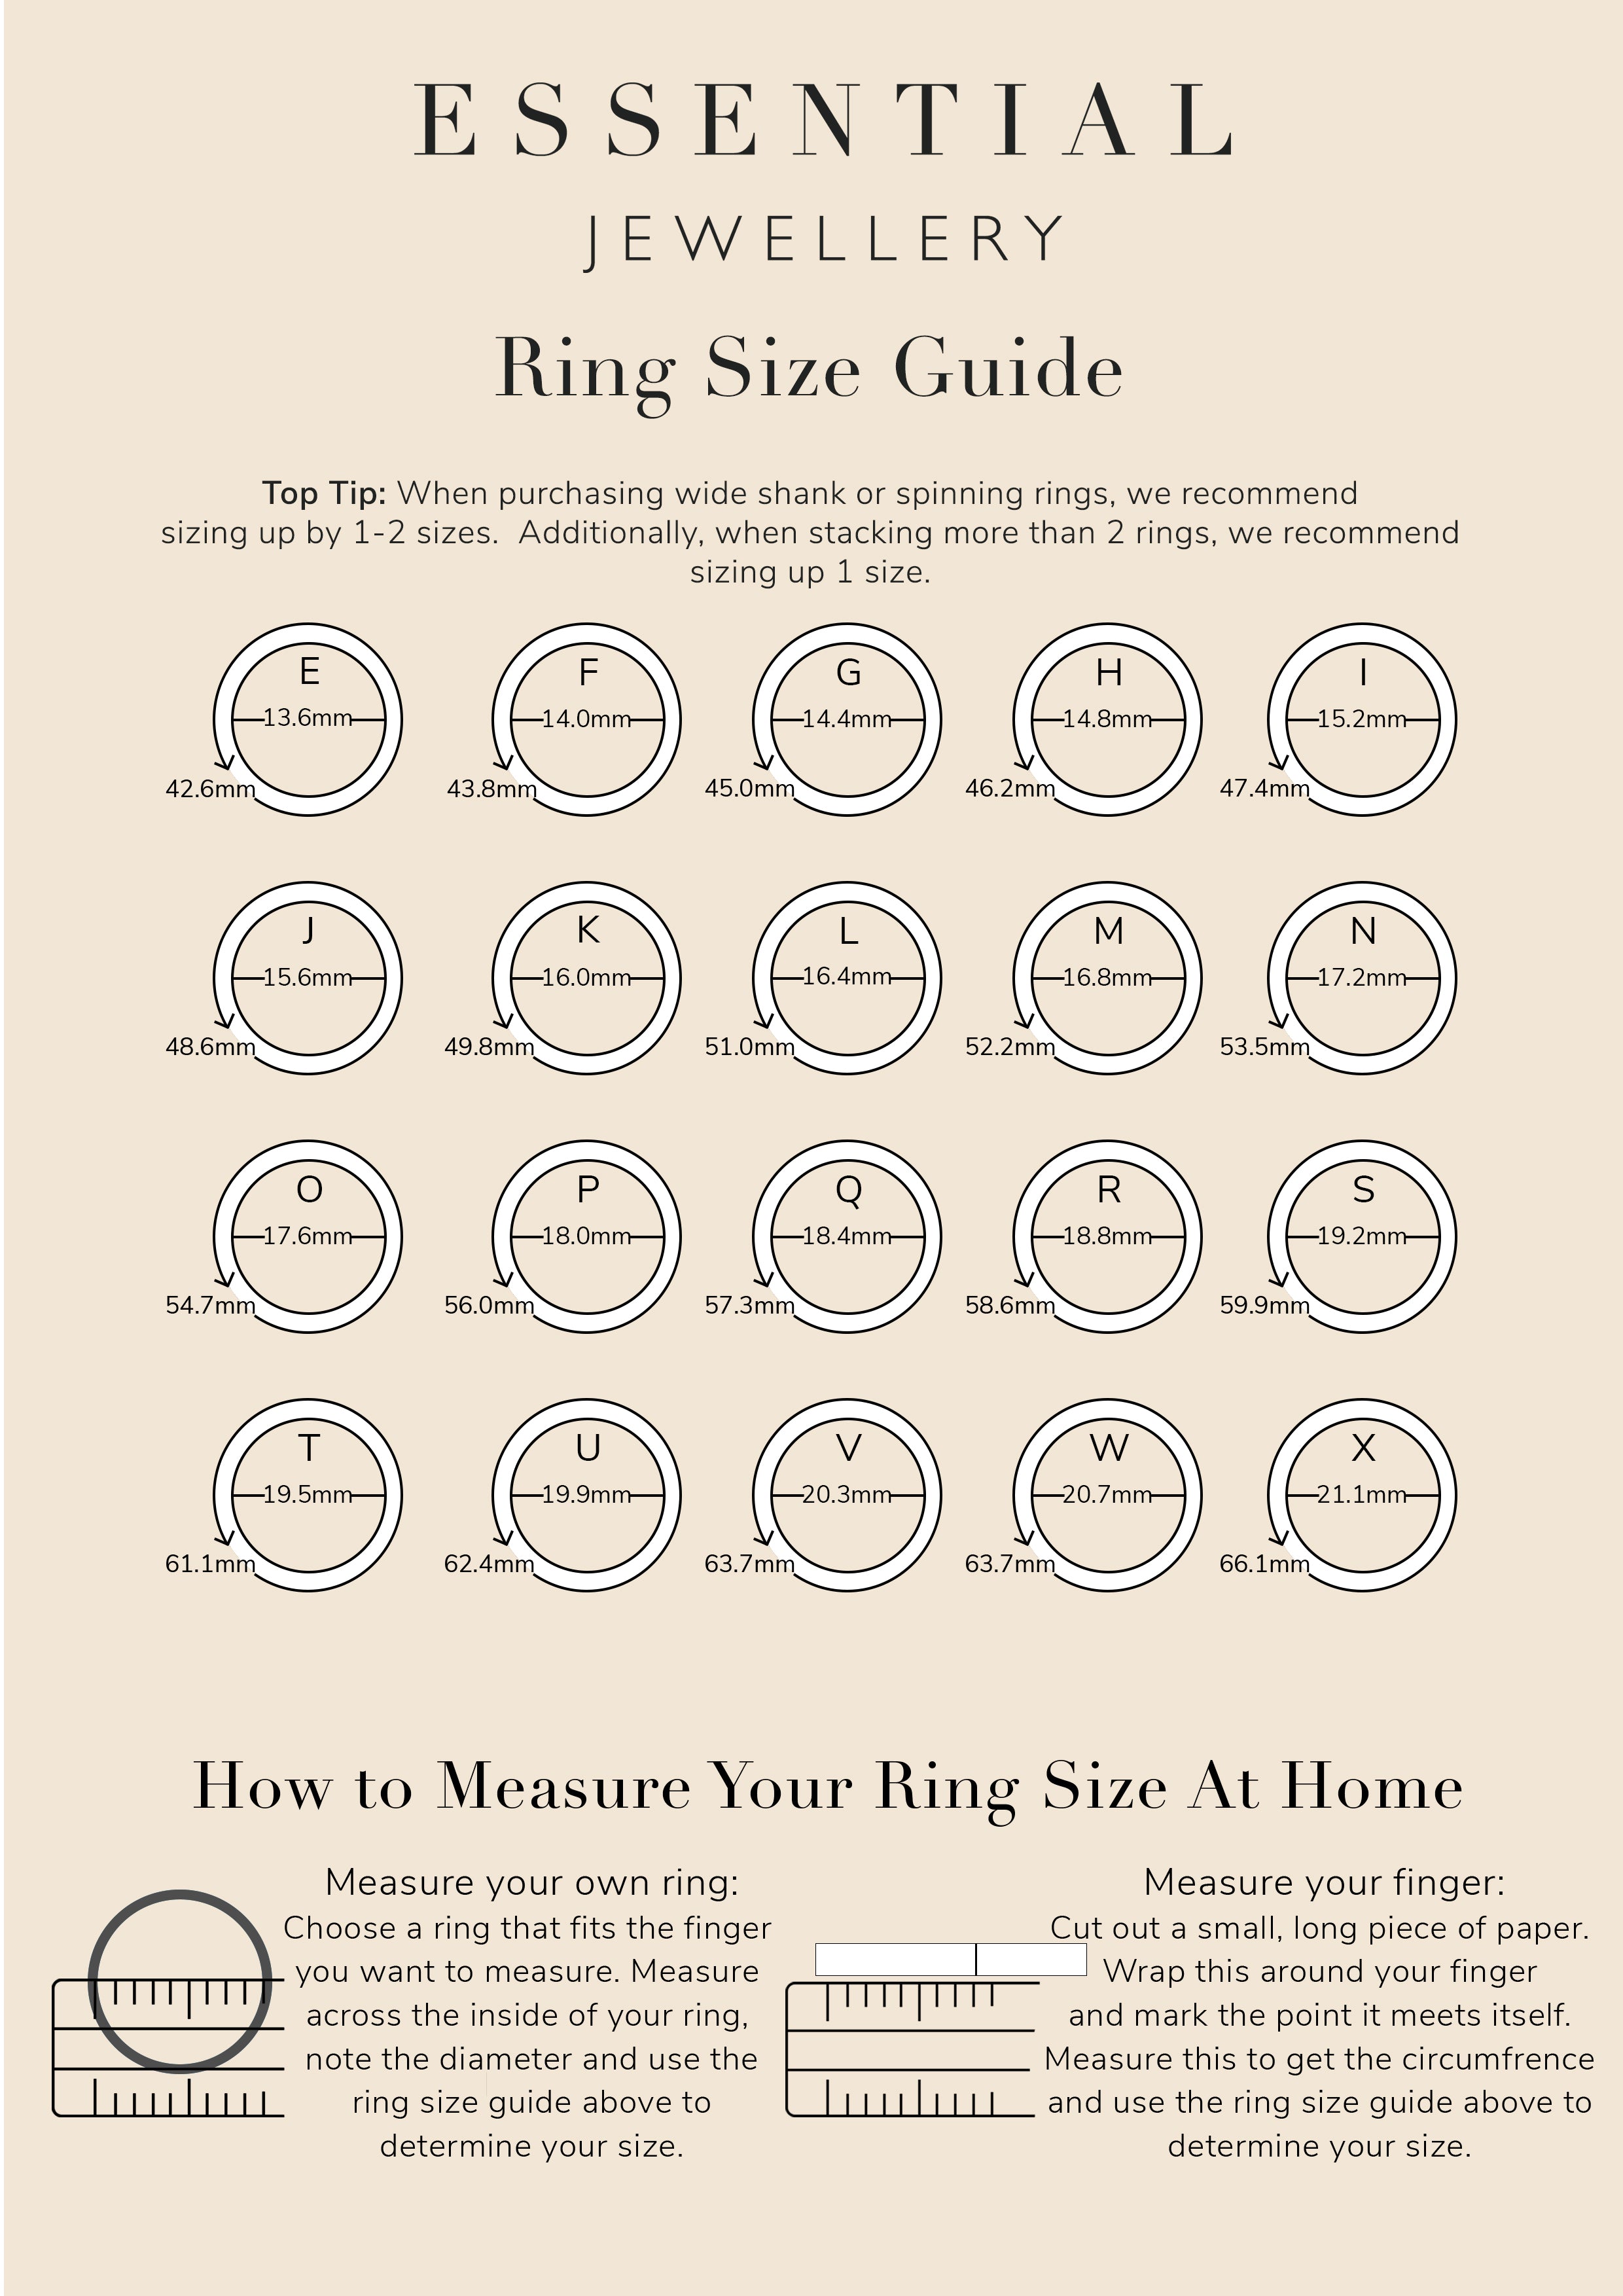 Will it Fit? Our Go-To Online Ring Size Guide | Medley Jewellery